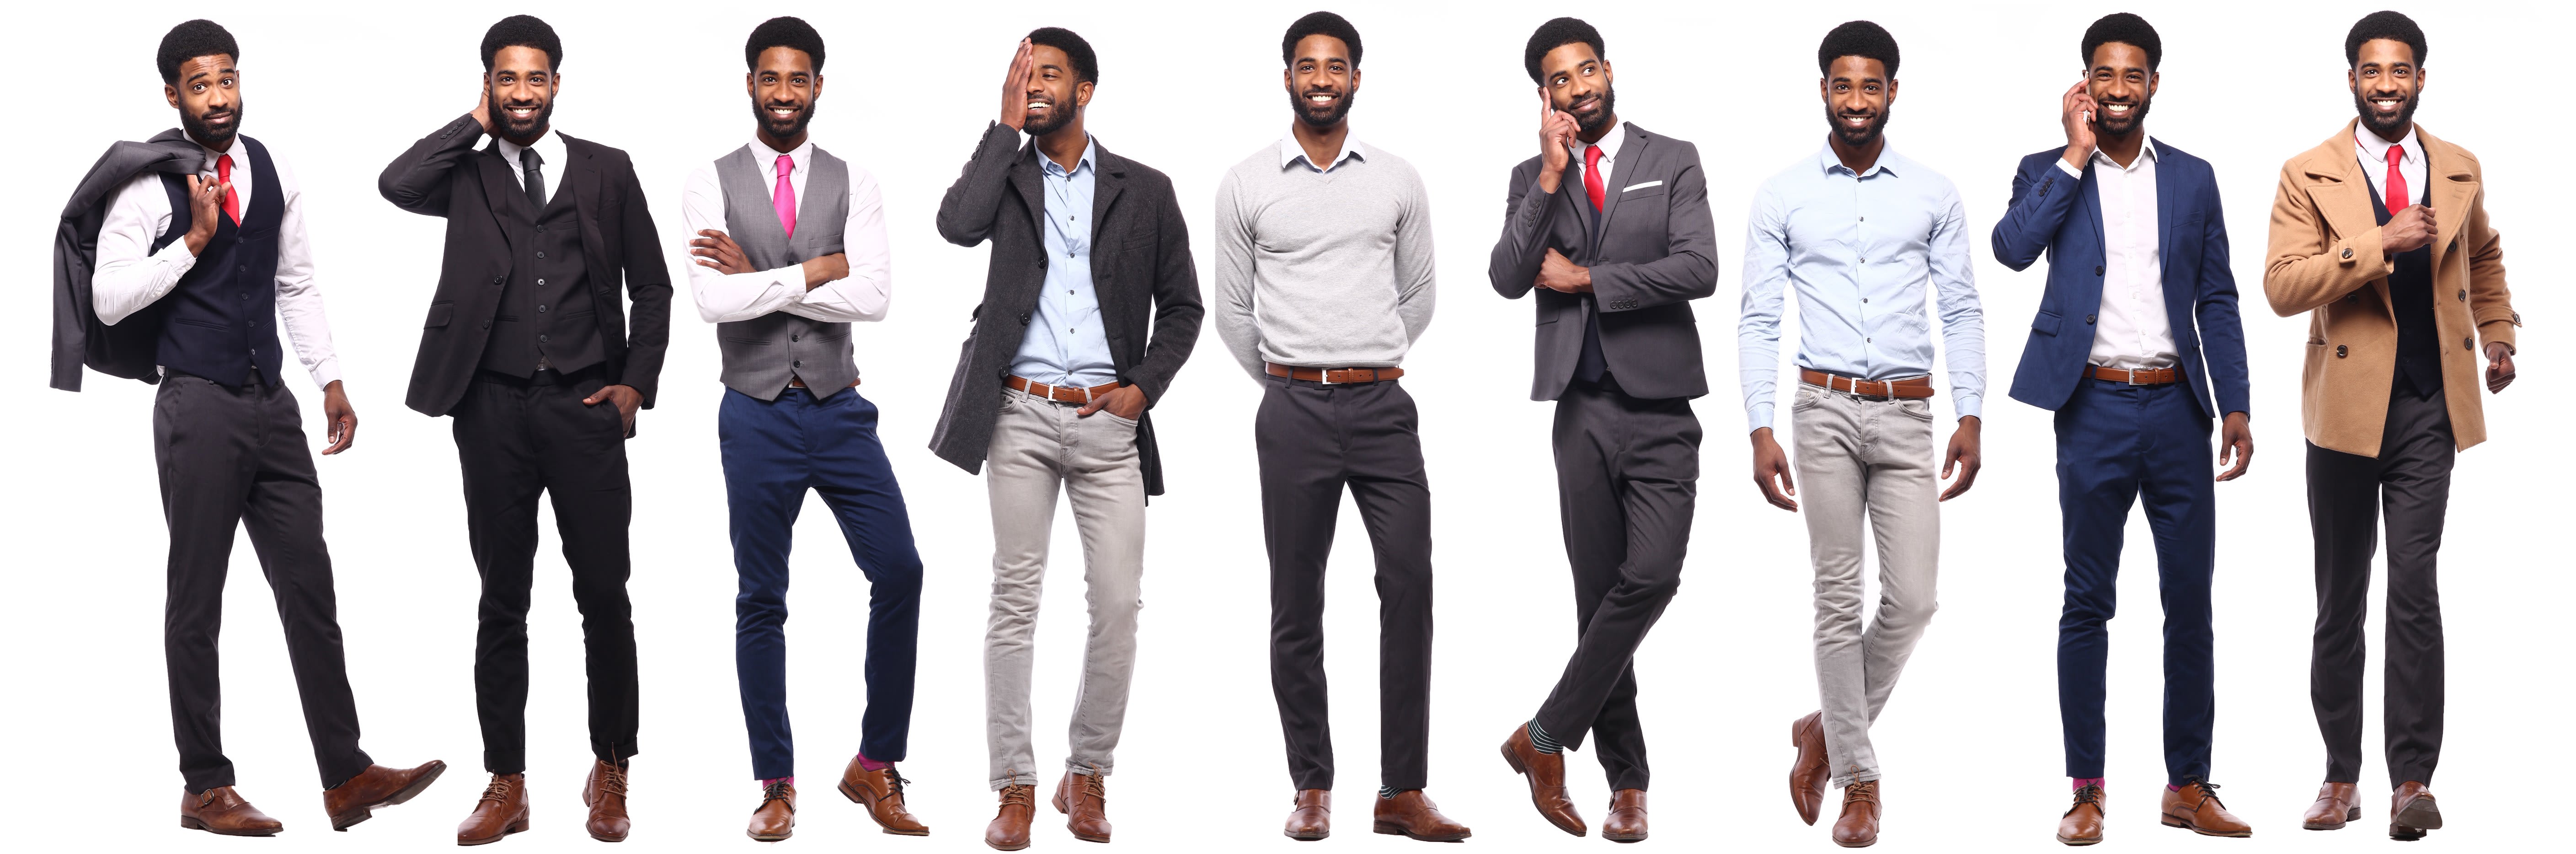 How To Dress Up For Your Interview ⋆ Best Fashion Blog For Men -  TheUnstitchd.com